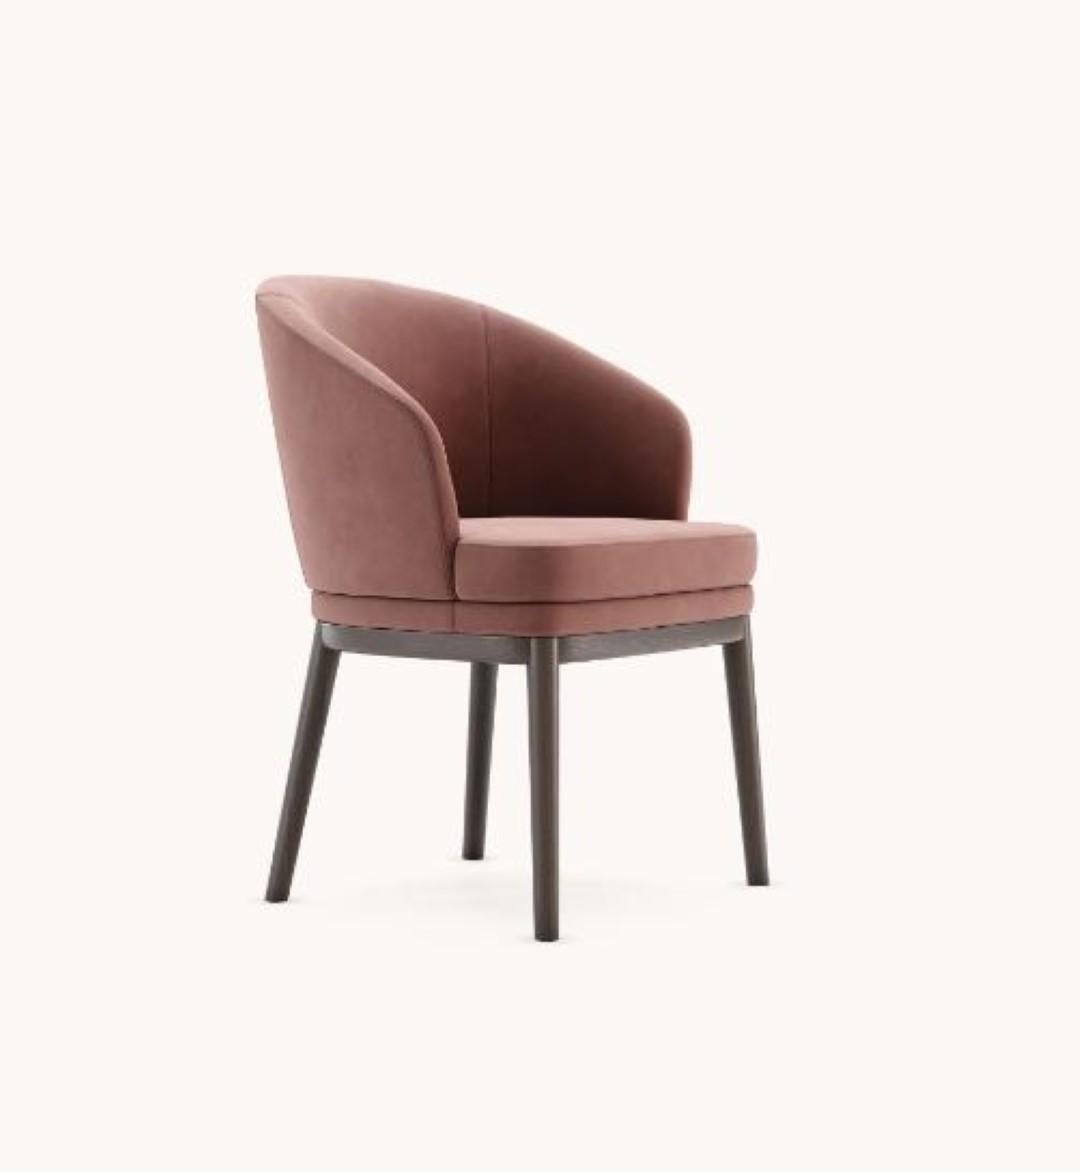 Ruth chair by Domkapa
Materials: microfibers, Fumé stained beech.
Dimensions: W 63 x D 58 x H 82 cm.
Also available in different materials. 

Carter chair is the perfect combination between traditional and contemporary lines, thickness, and